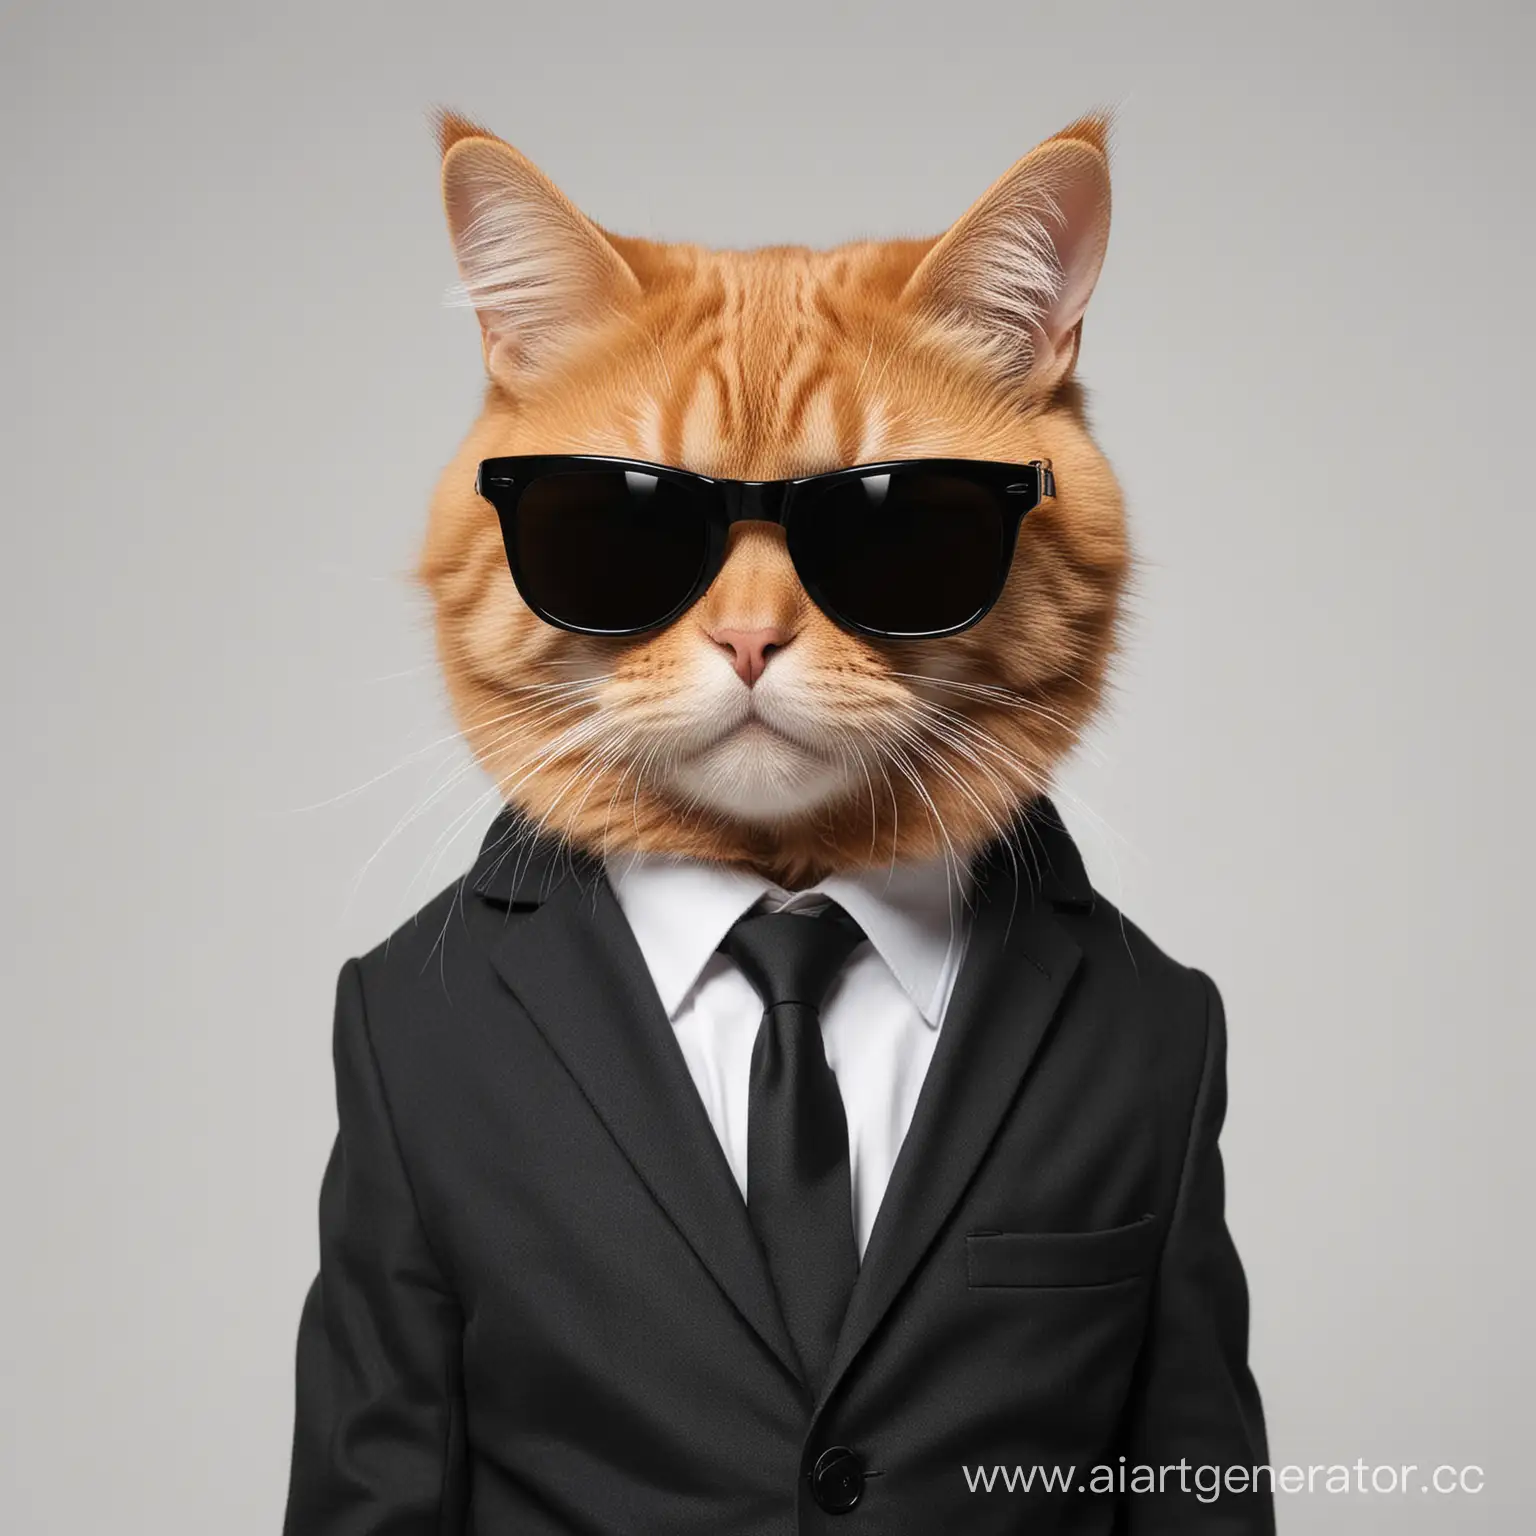 Stylish-Red-Cat-in-Business-Attire-and-Sunglasses-Against-Clean-White-Background